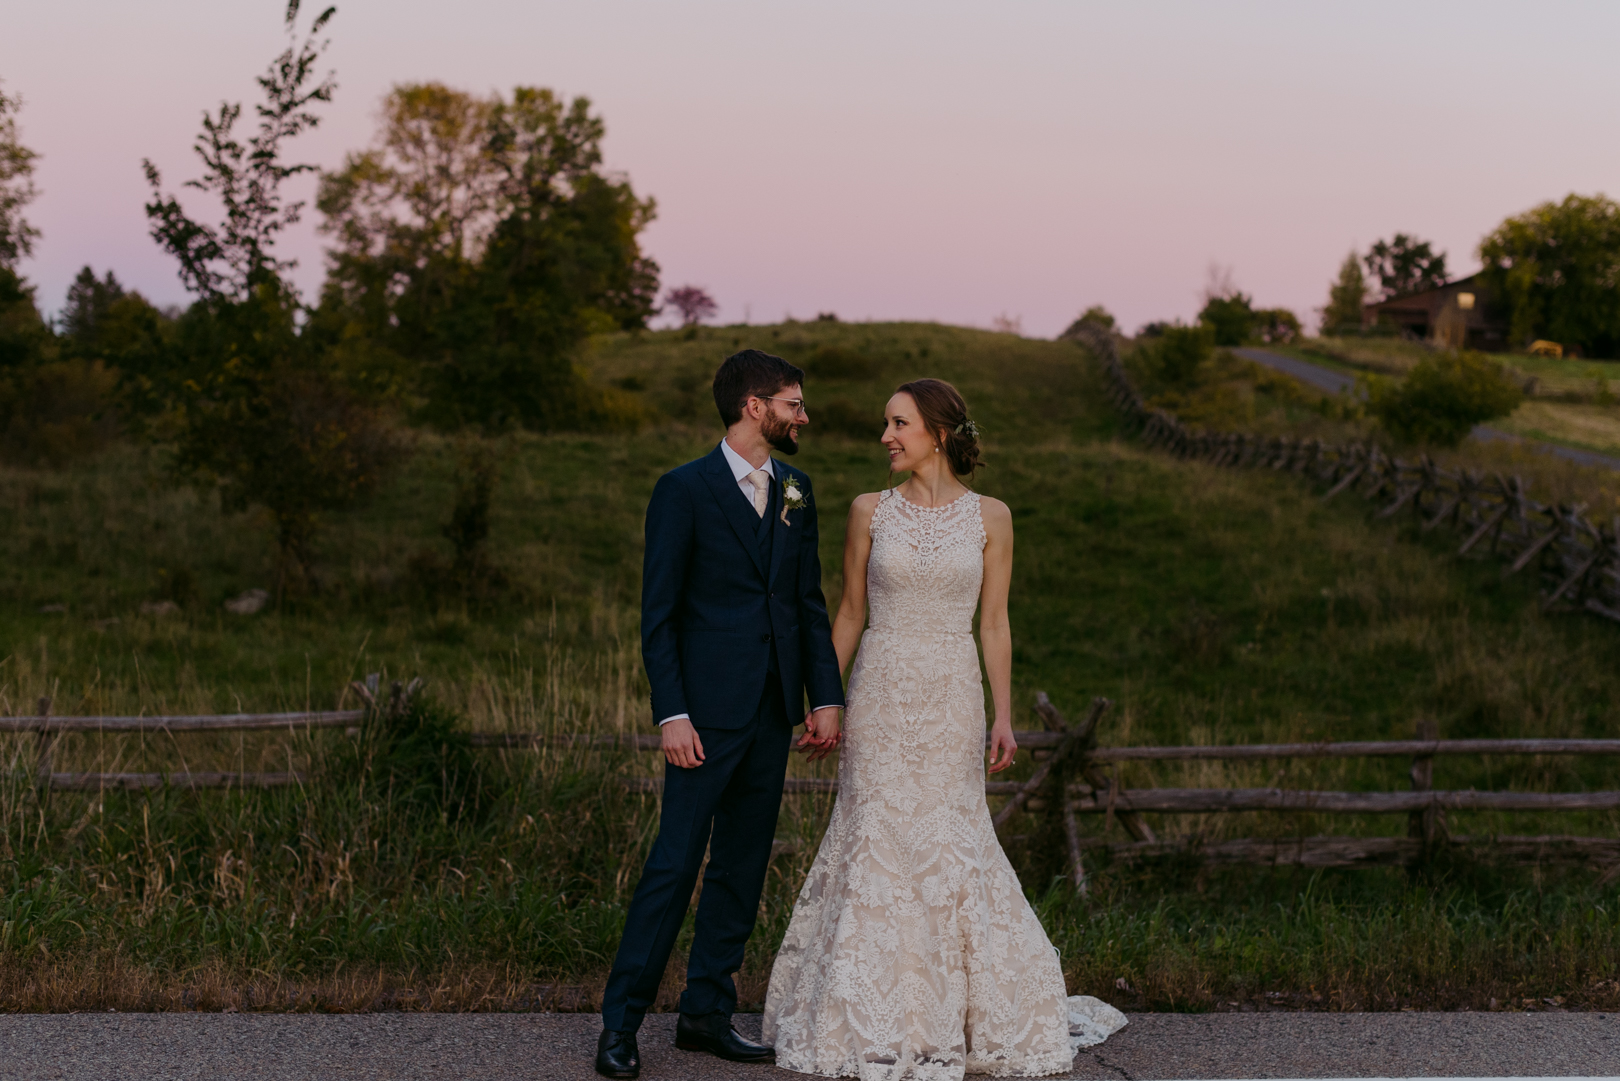 bride and groom holding hands by farmers field at sunset